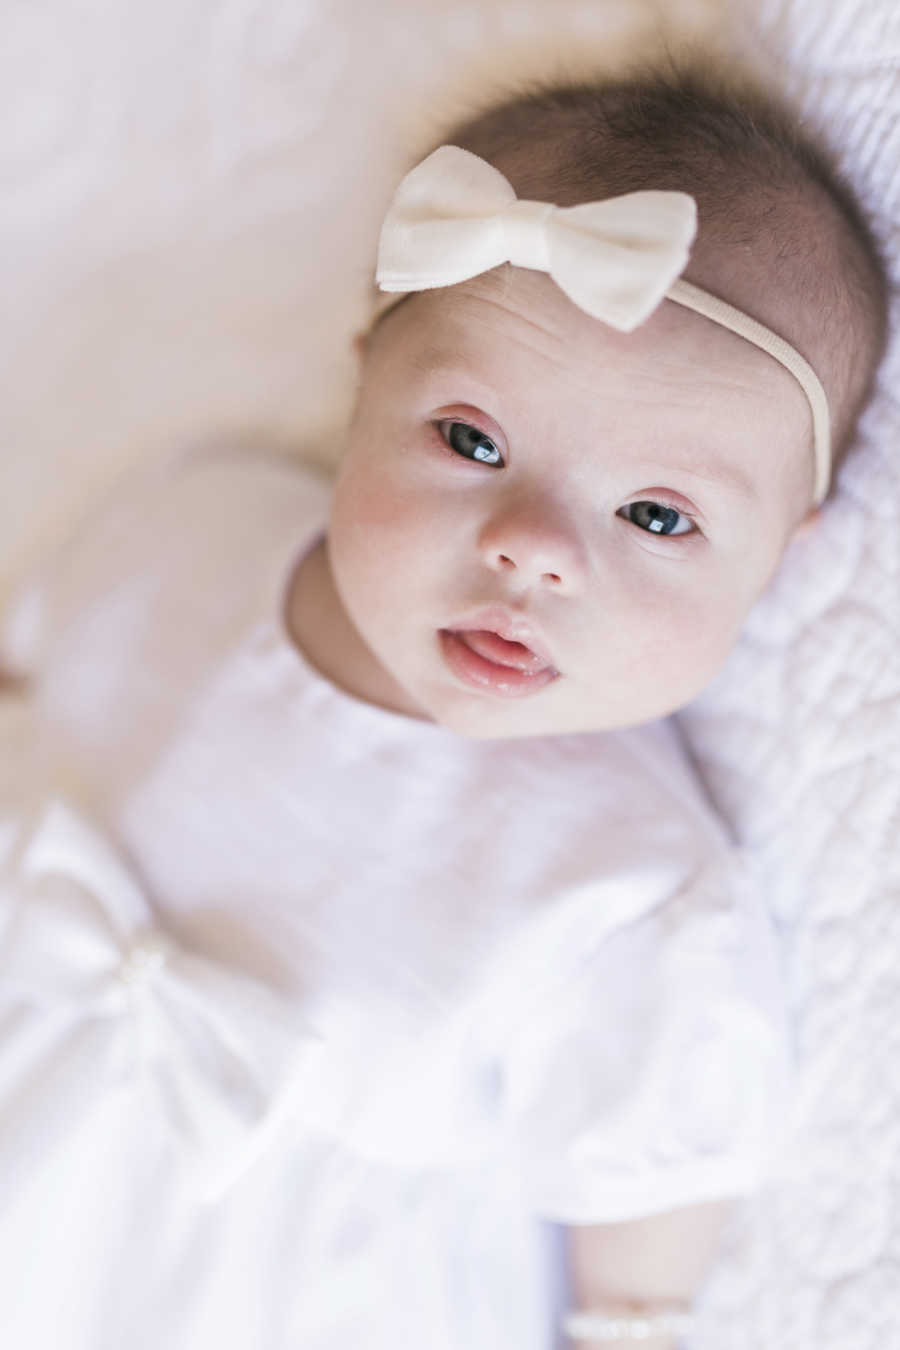 Baby with down syndrome and heart condition lays on back wearing white dress and headband